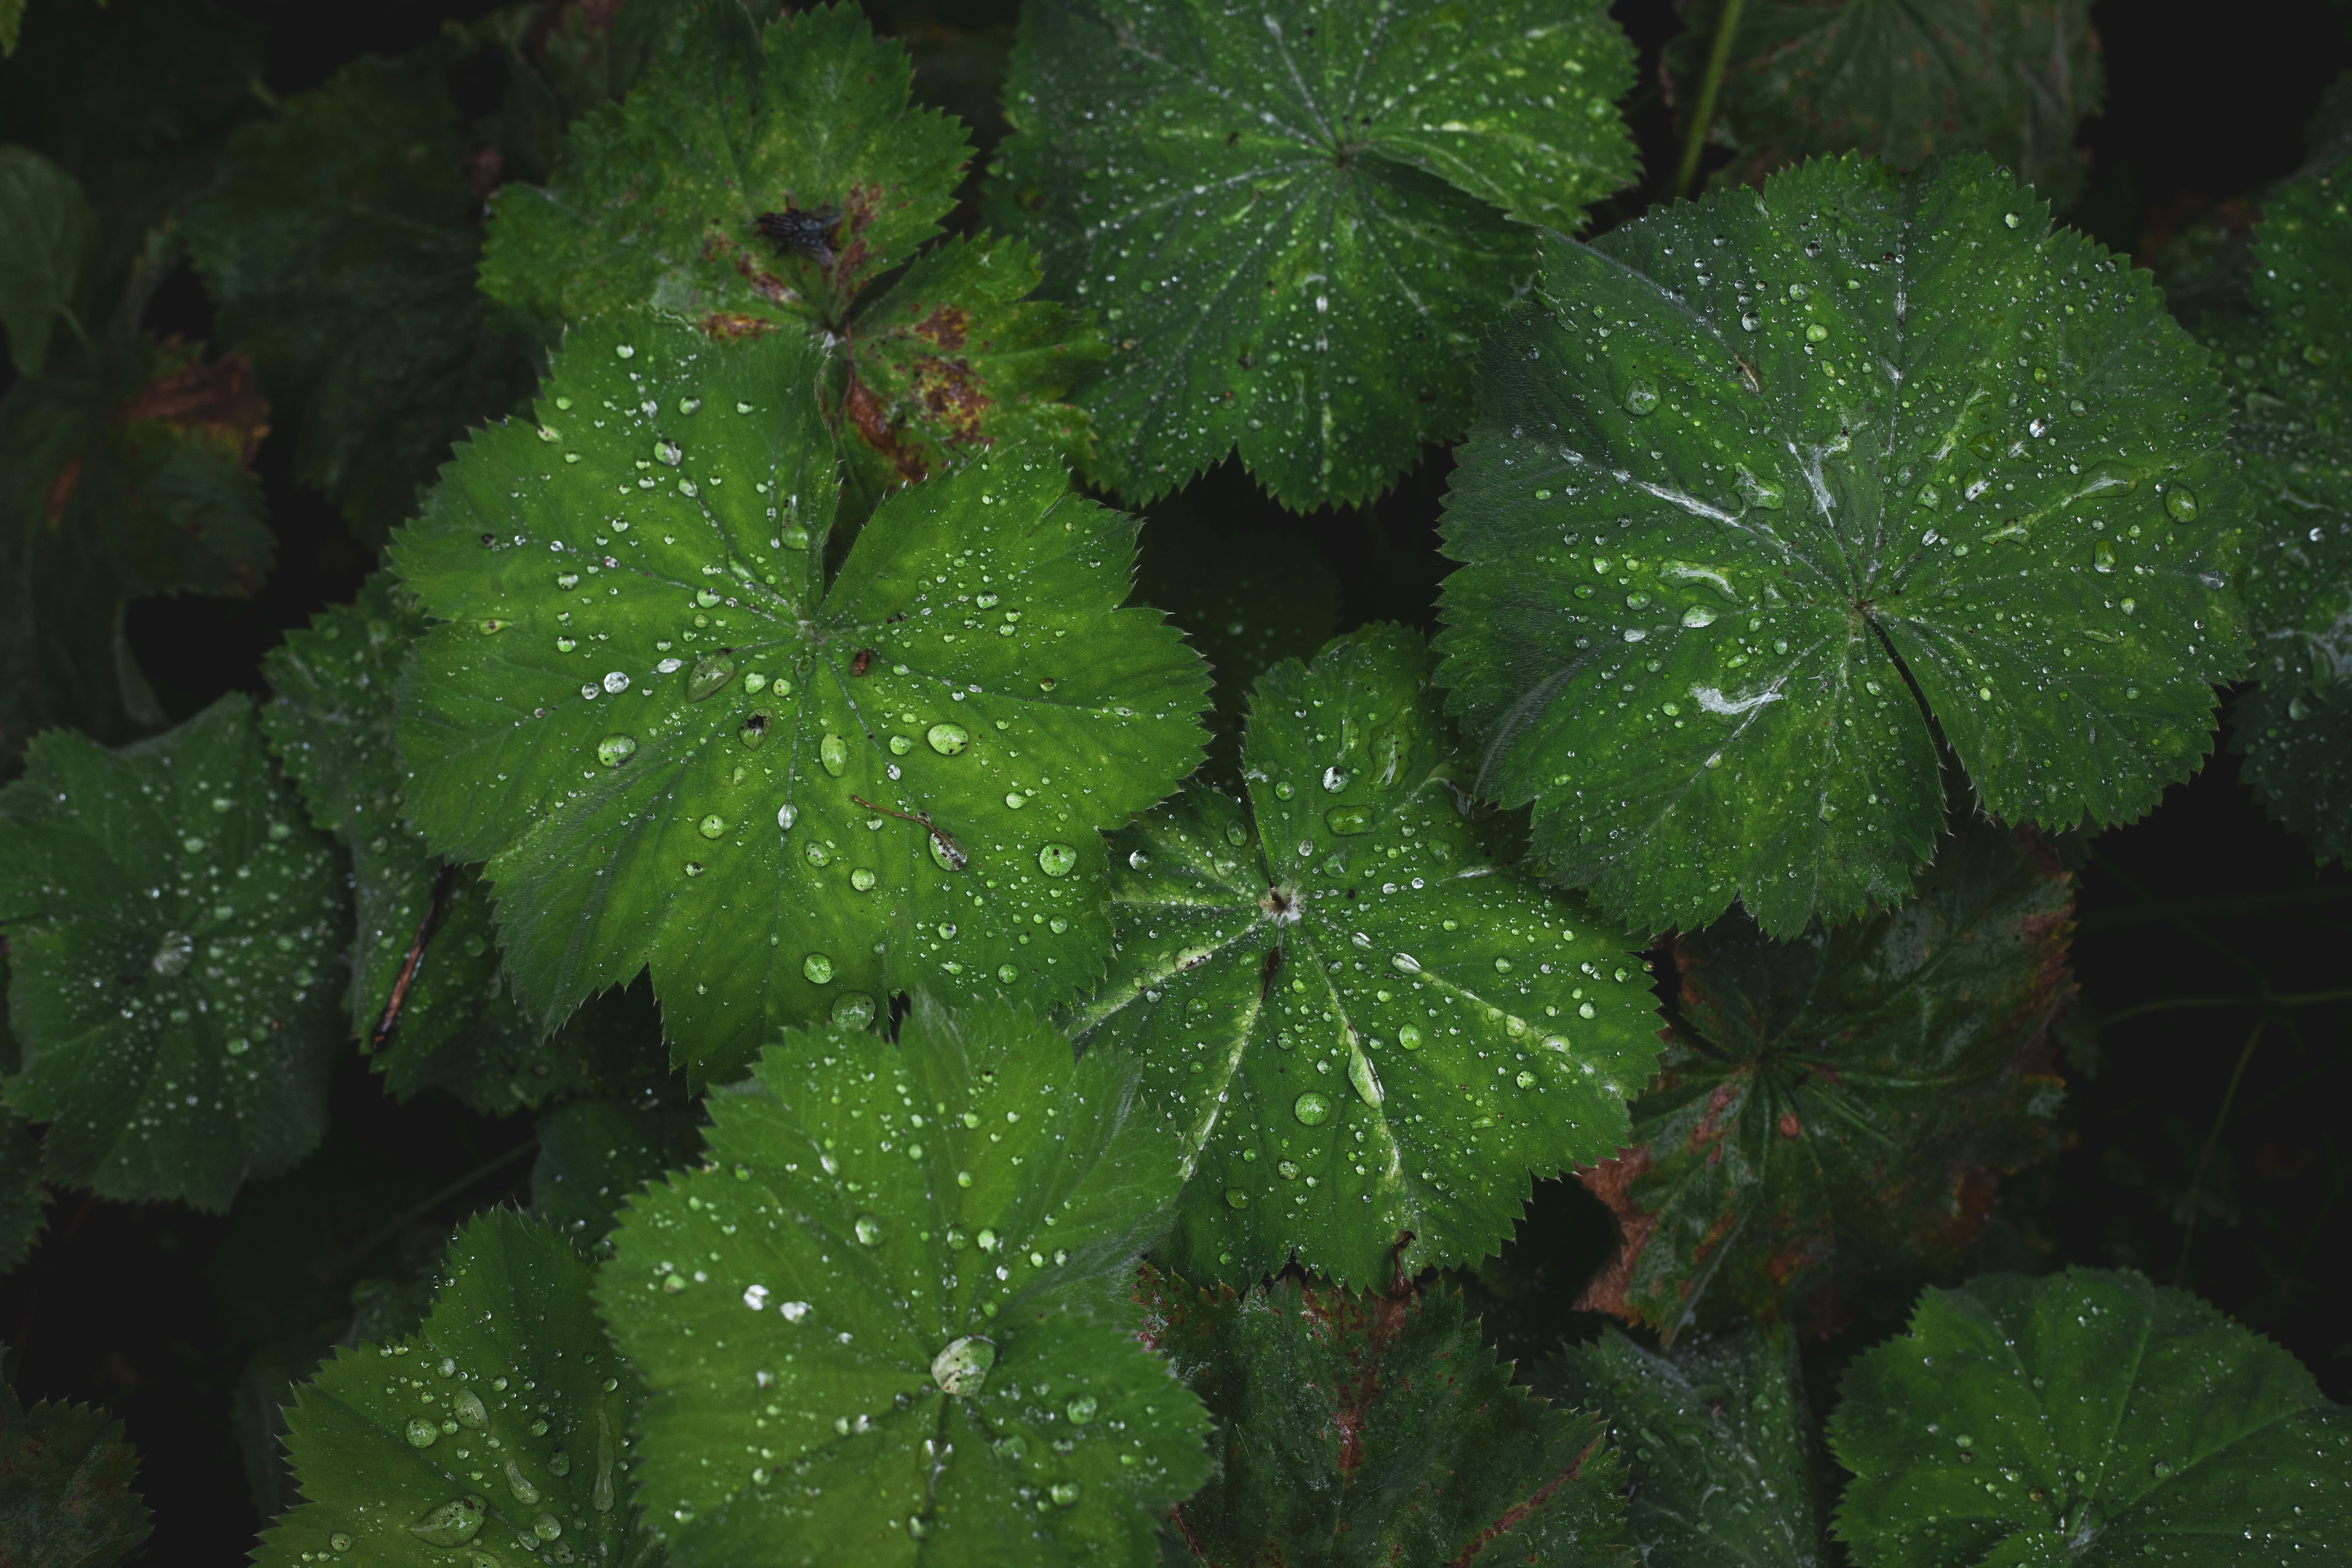 green leaves with water droplets